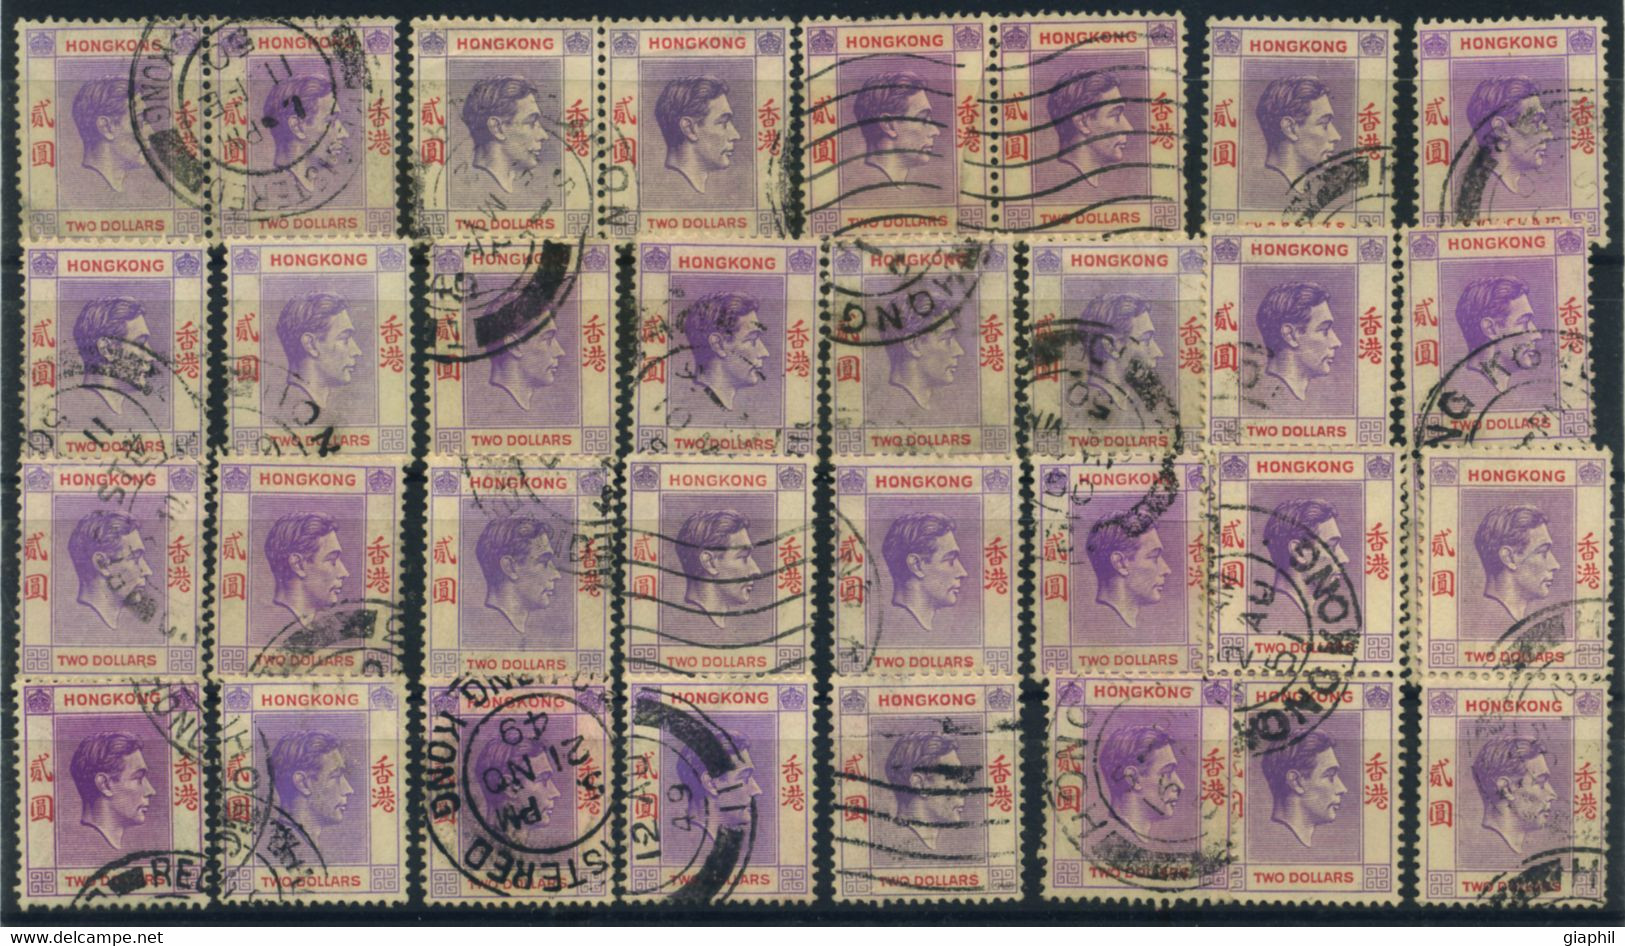 HONG KONG 1938-52 2 $ (SG 160) 32 USED EXAMPLES OFFER! - Oblitérés